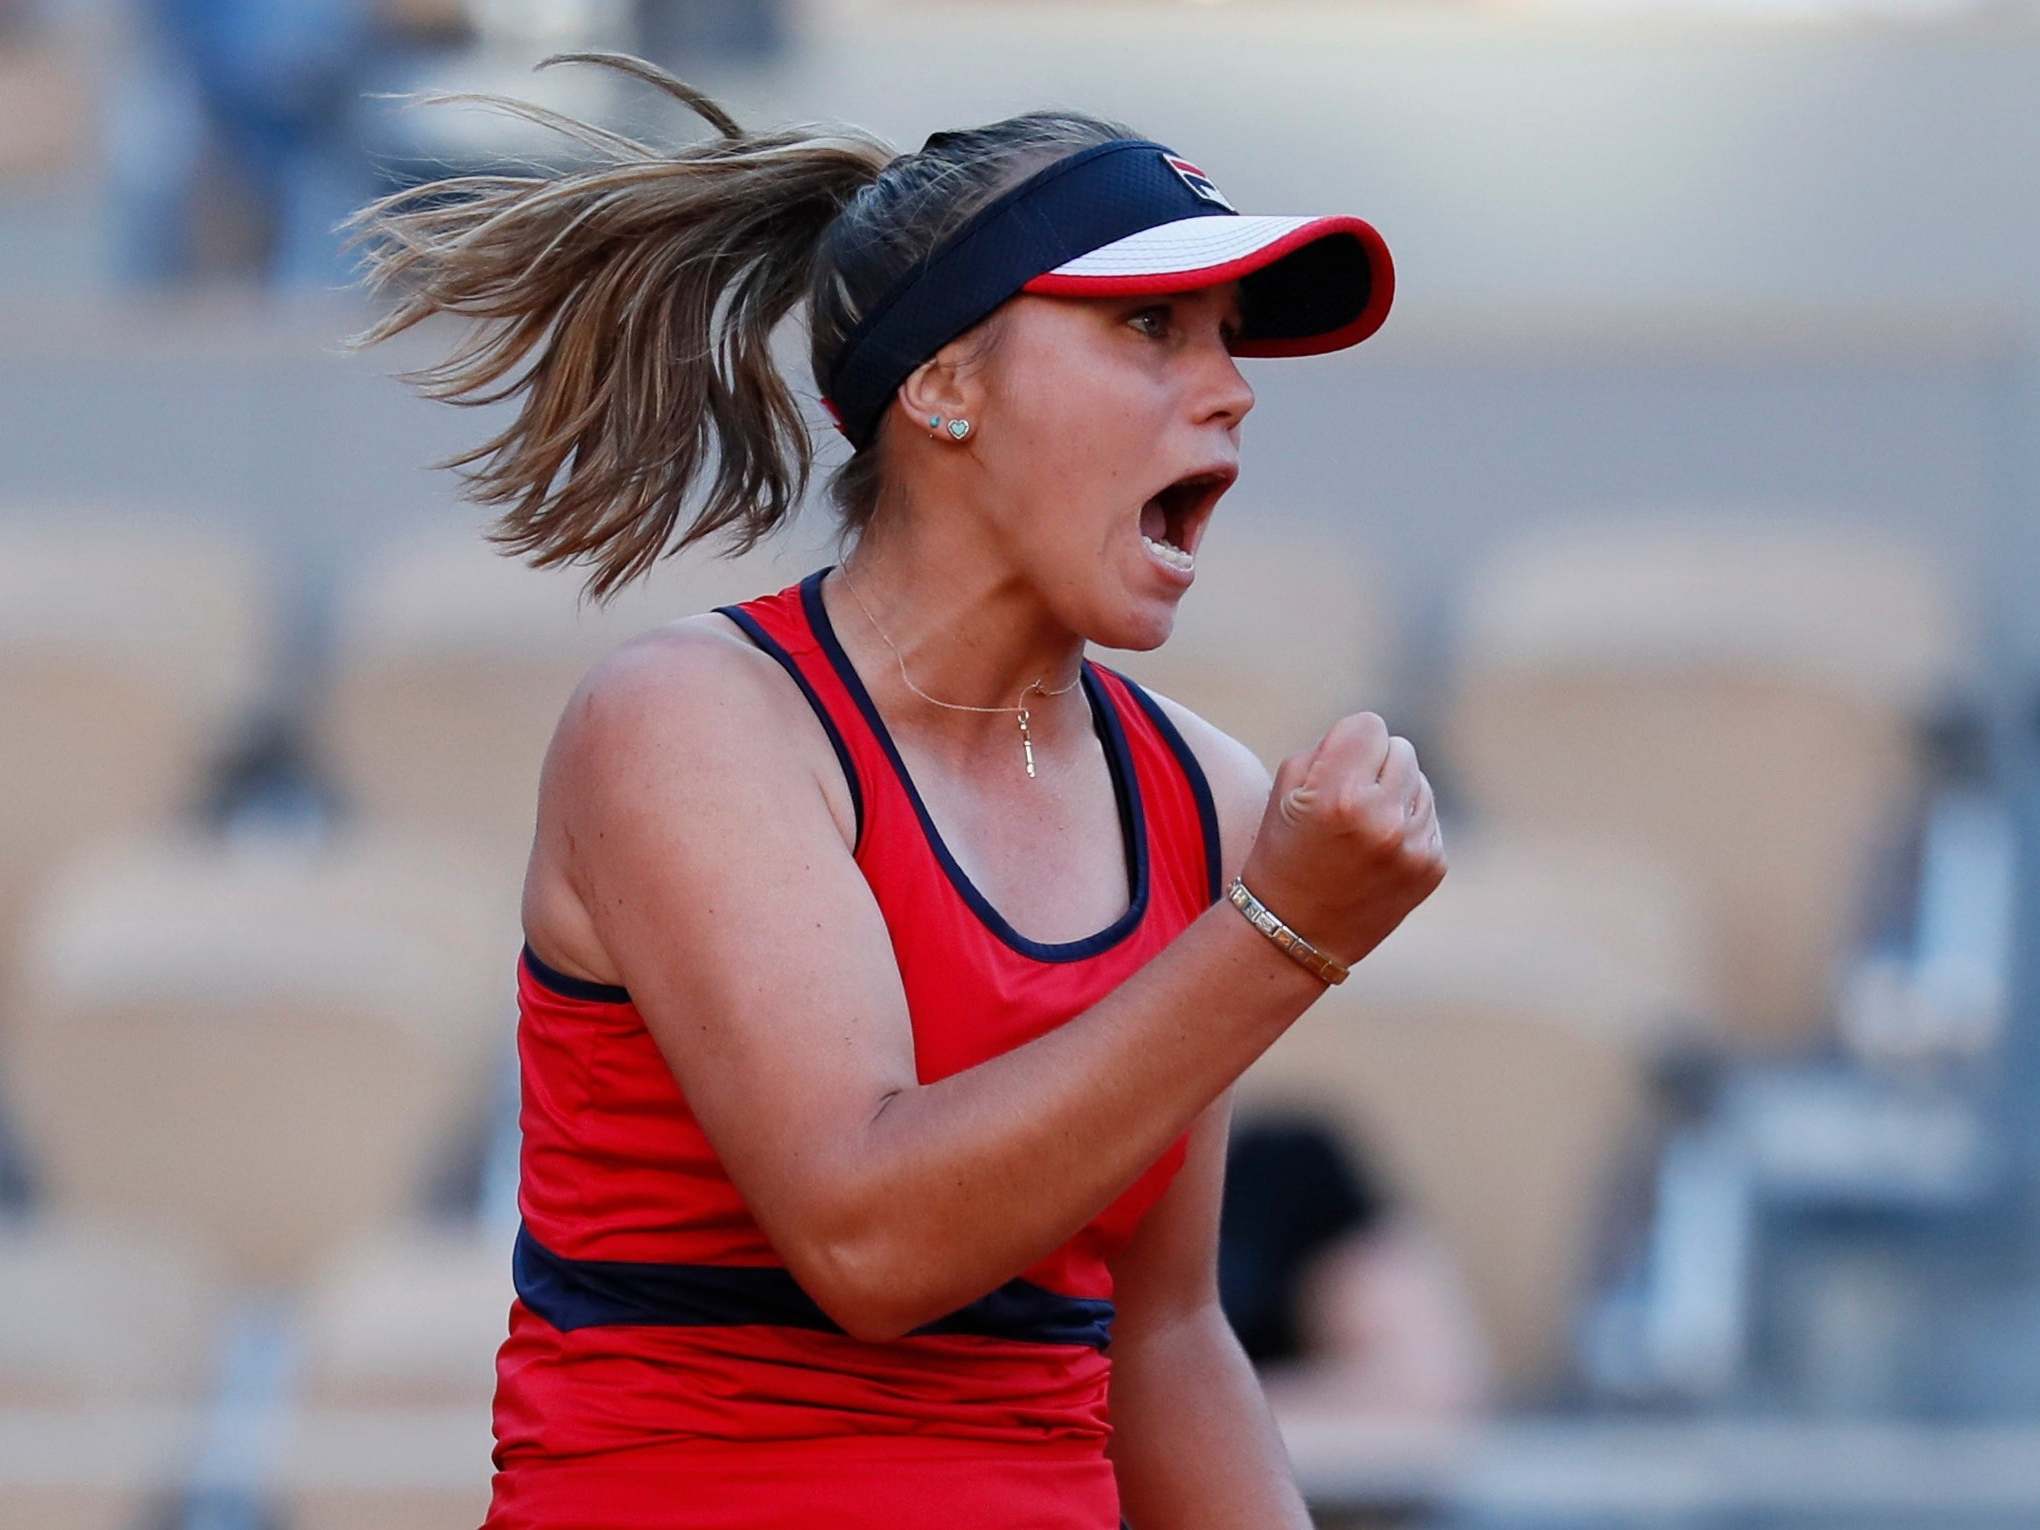 Alize Cornet of France celebrates beating Serena Williams of the